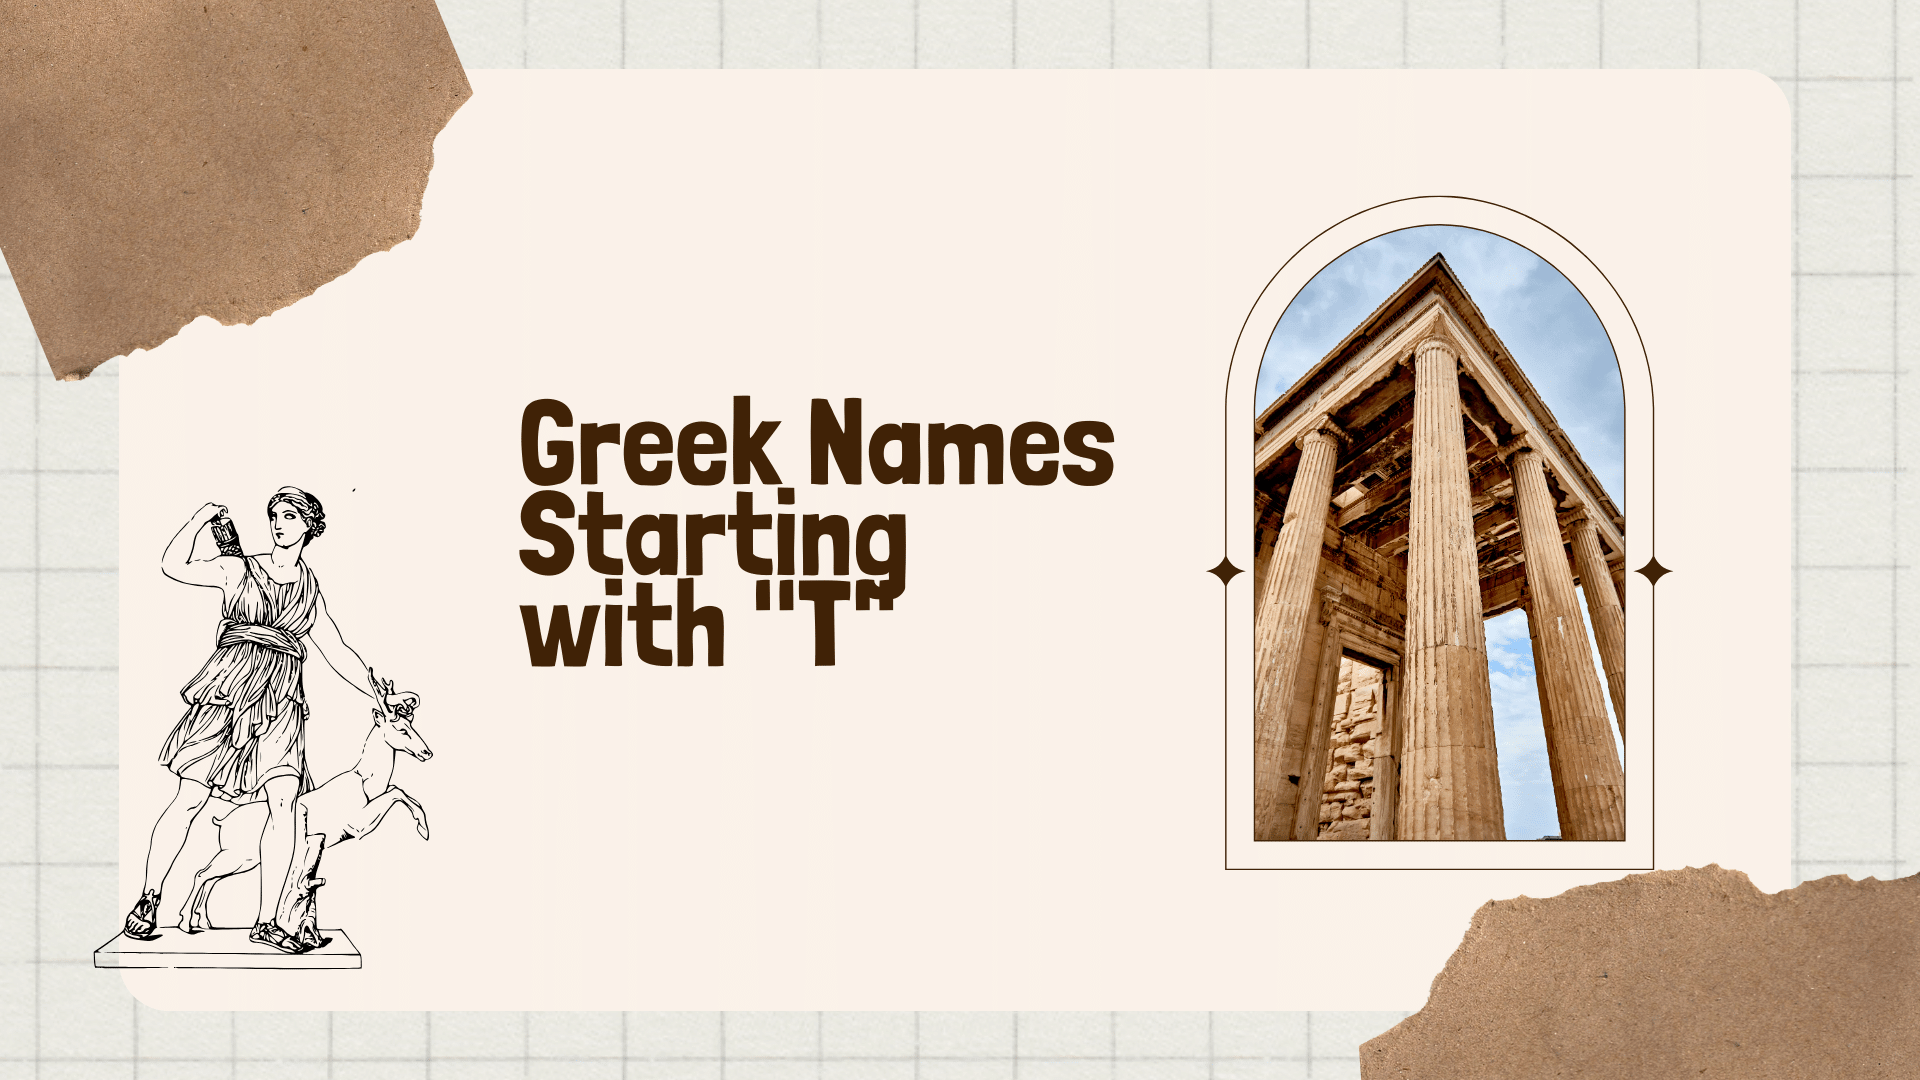 Greek Names Starting With "T"